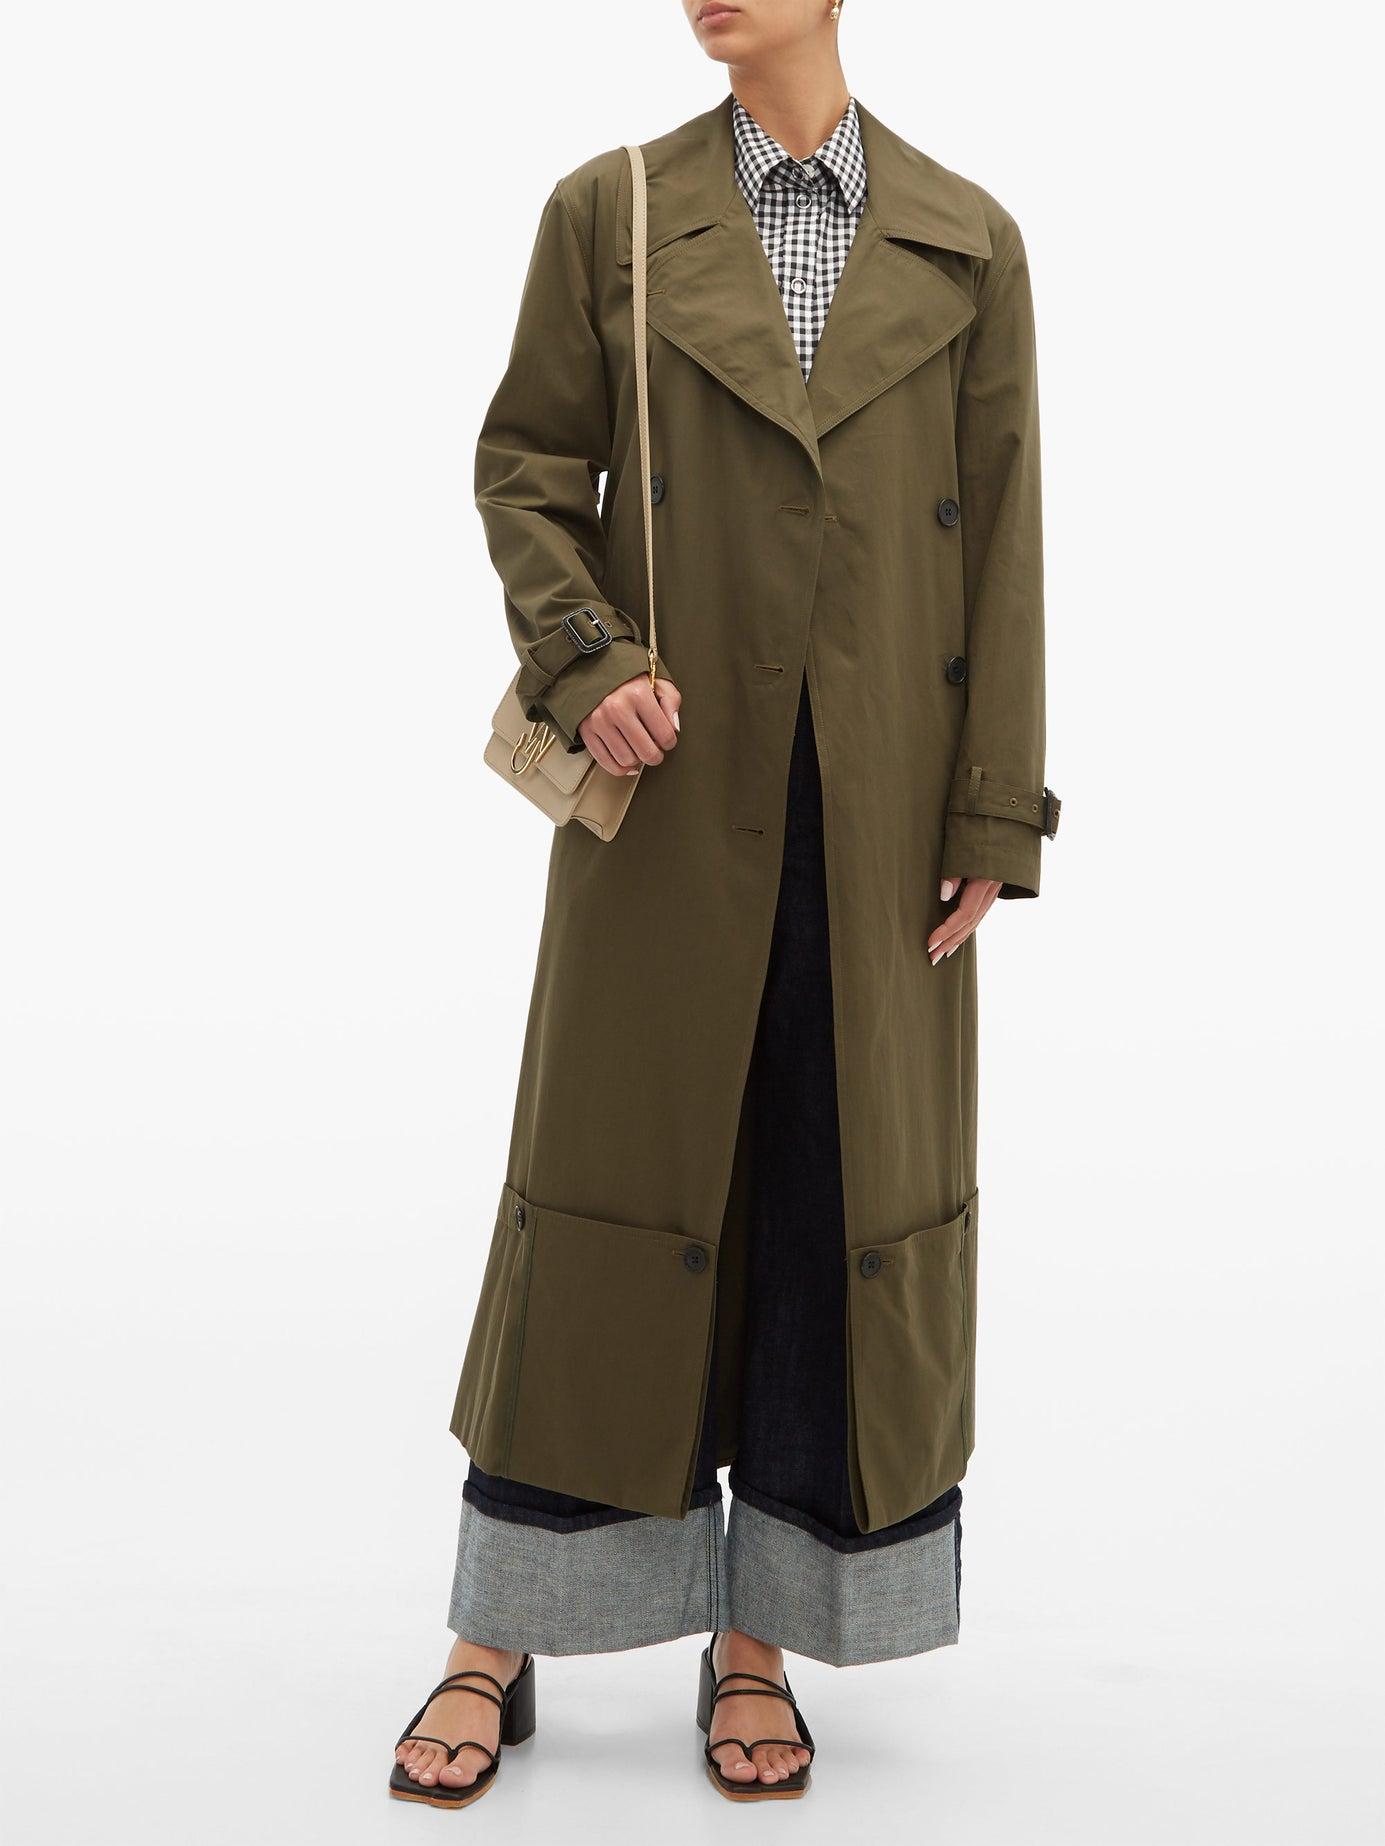 JW Anderson Extendable Hem Cotton Trench Coat in Green - Lyst